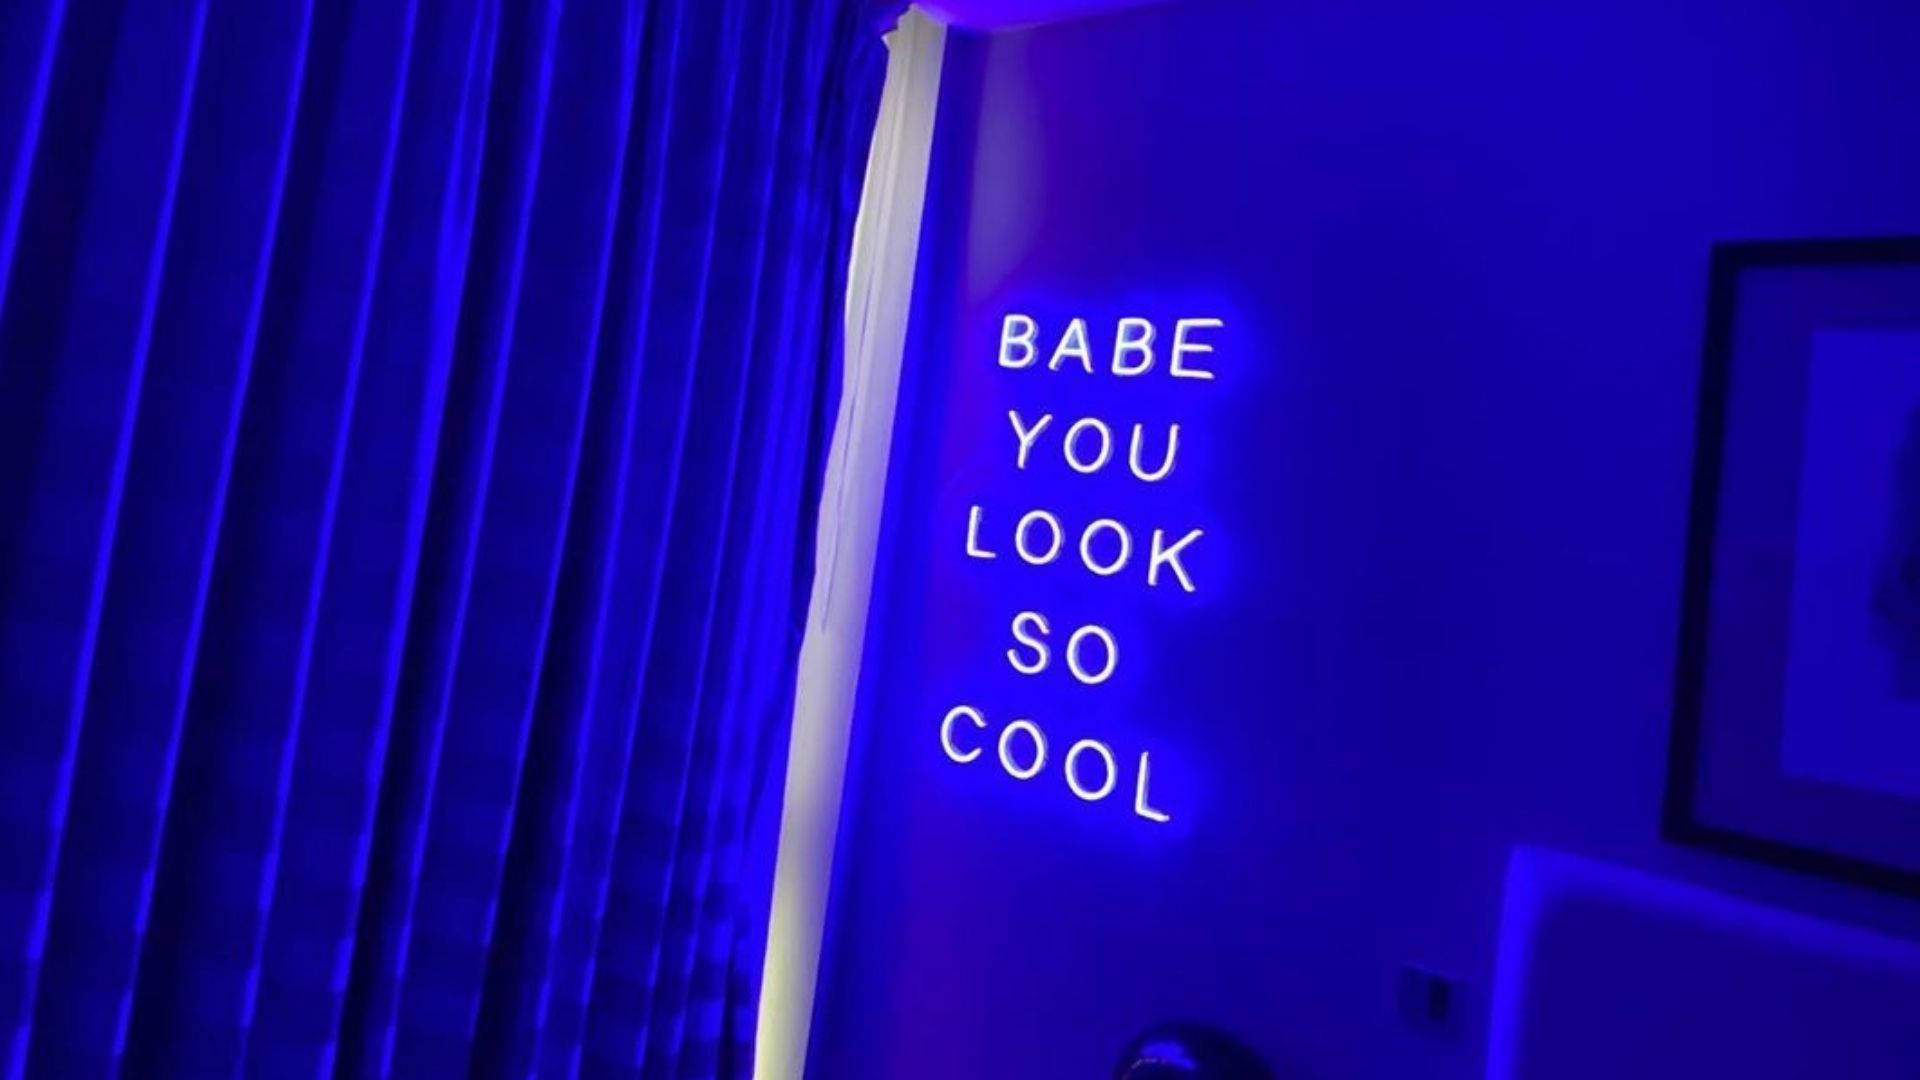 Neon Blue Room With LED Signage Wallpaper